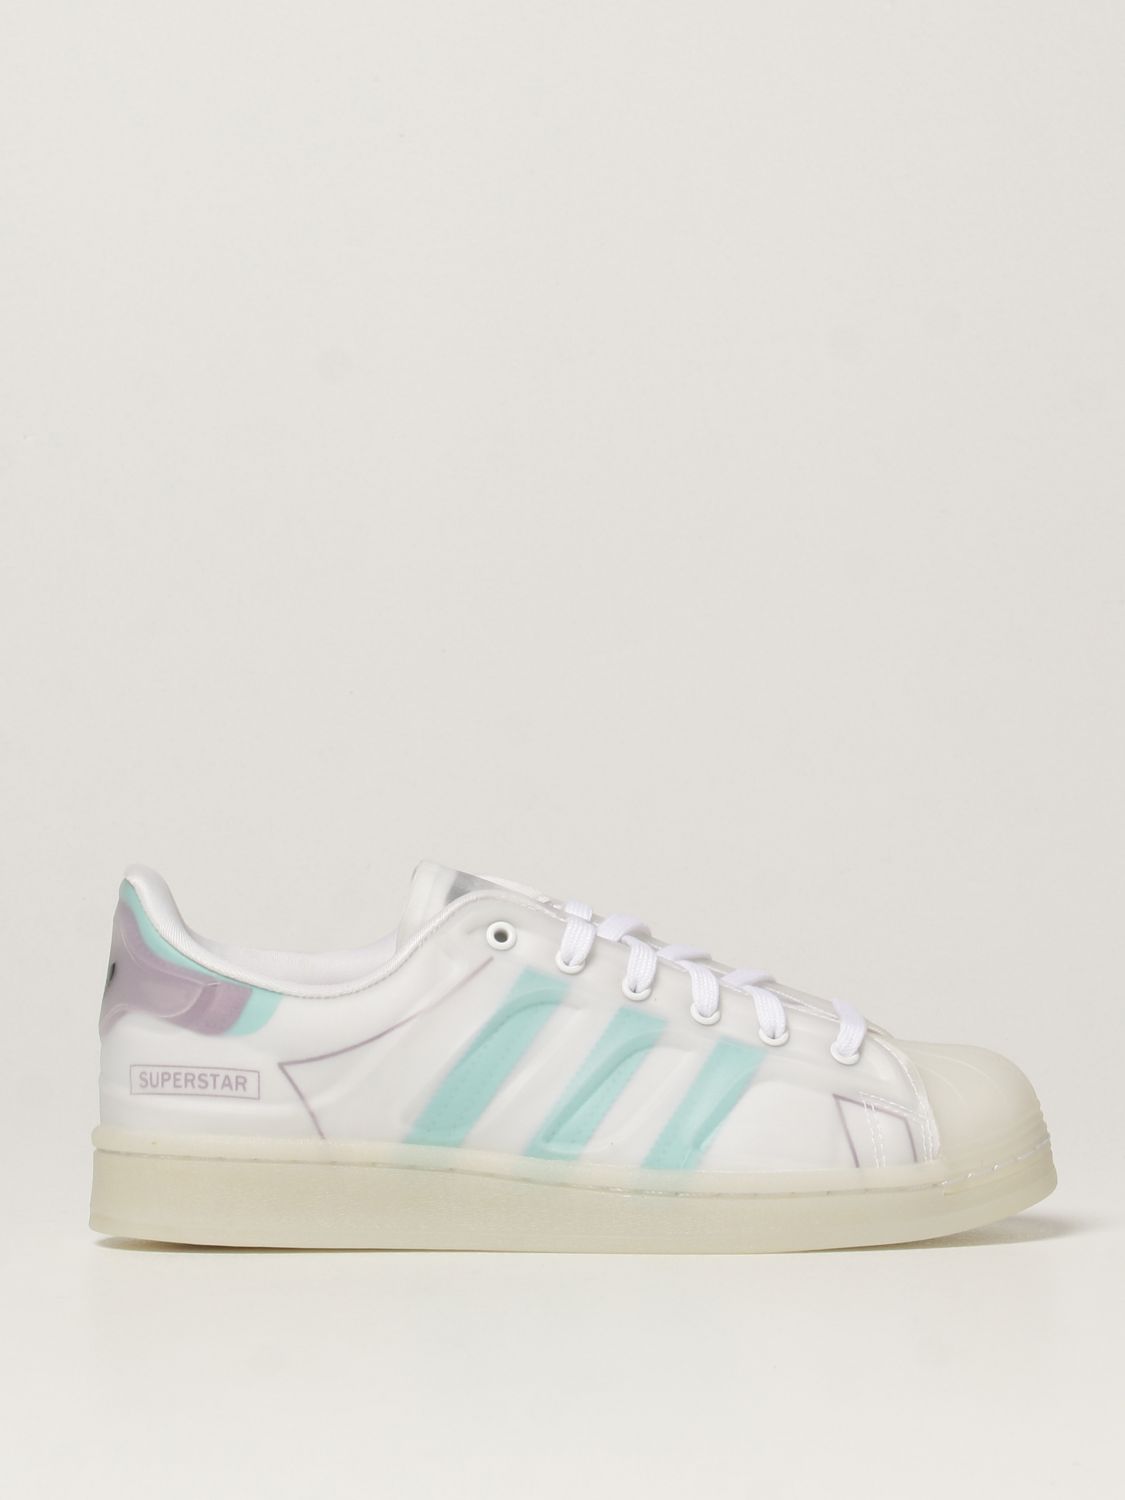 Adidas Originals Outlet: Shoes women | Sneakers Adidas Originals Women Originals FY7356 GIGLIO.COM